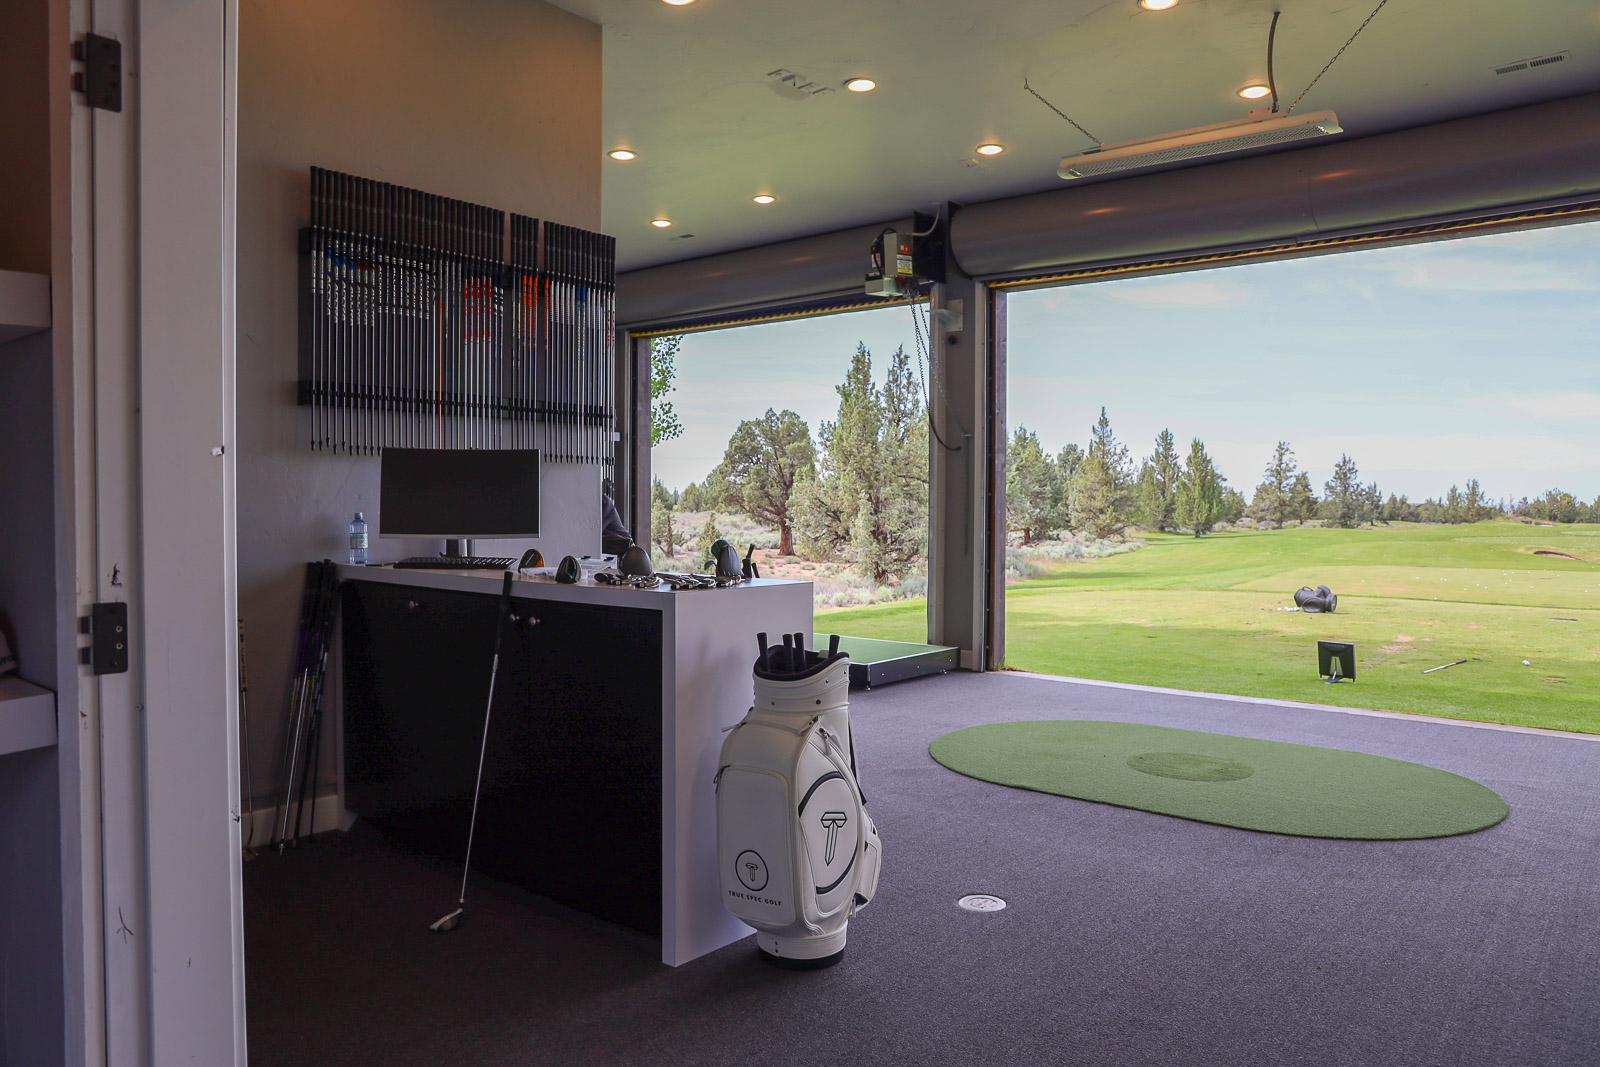 The True Spec fitting studio at Pronghorn Academy.